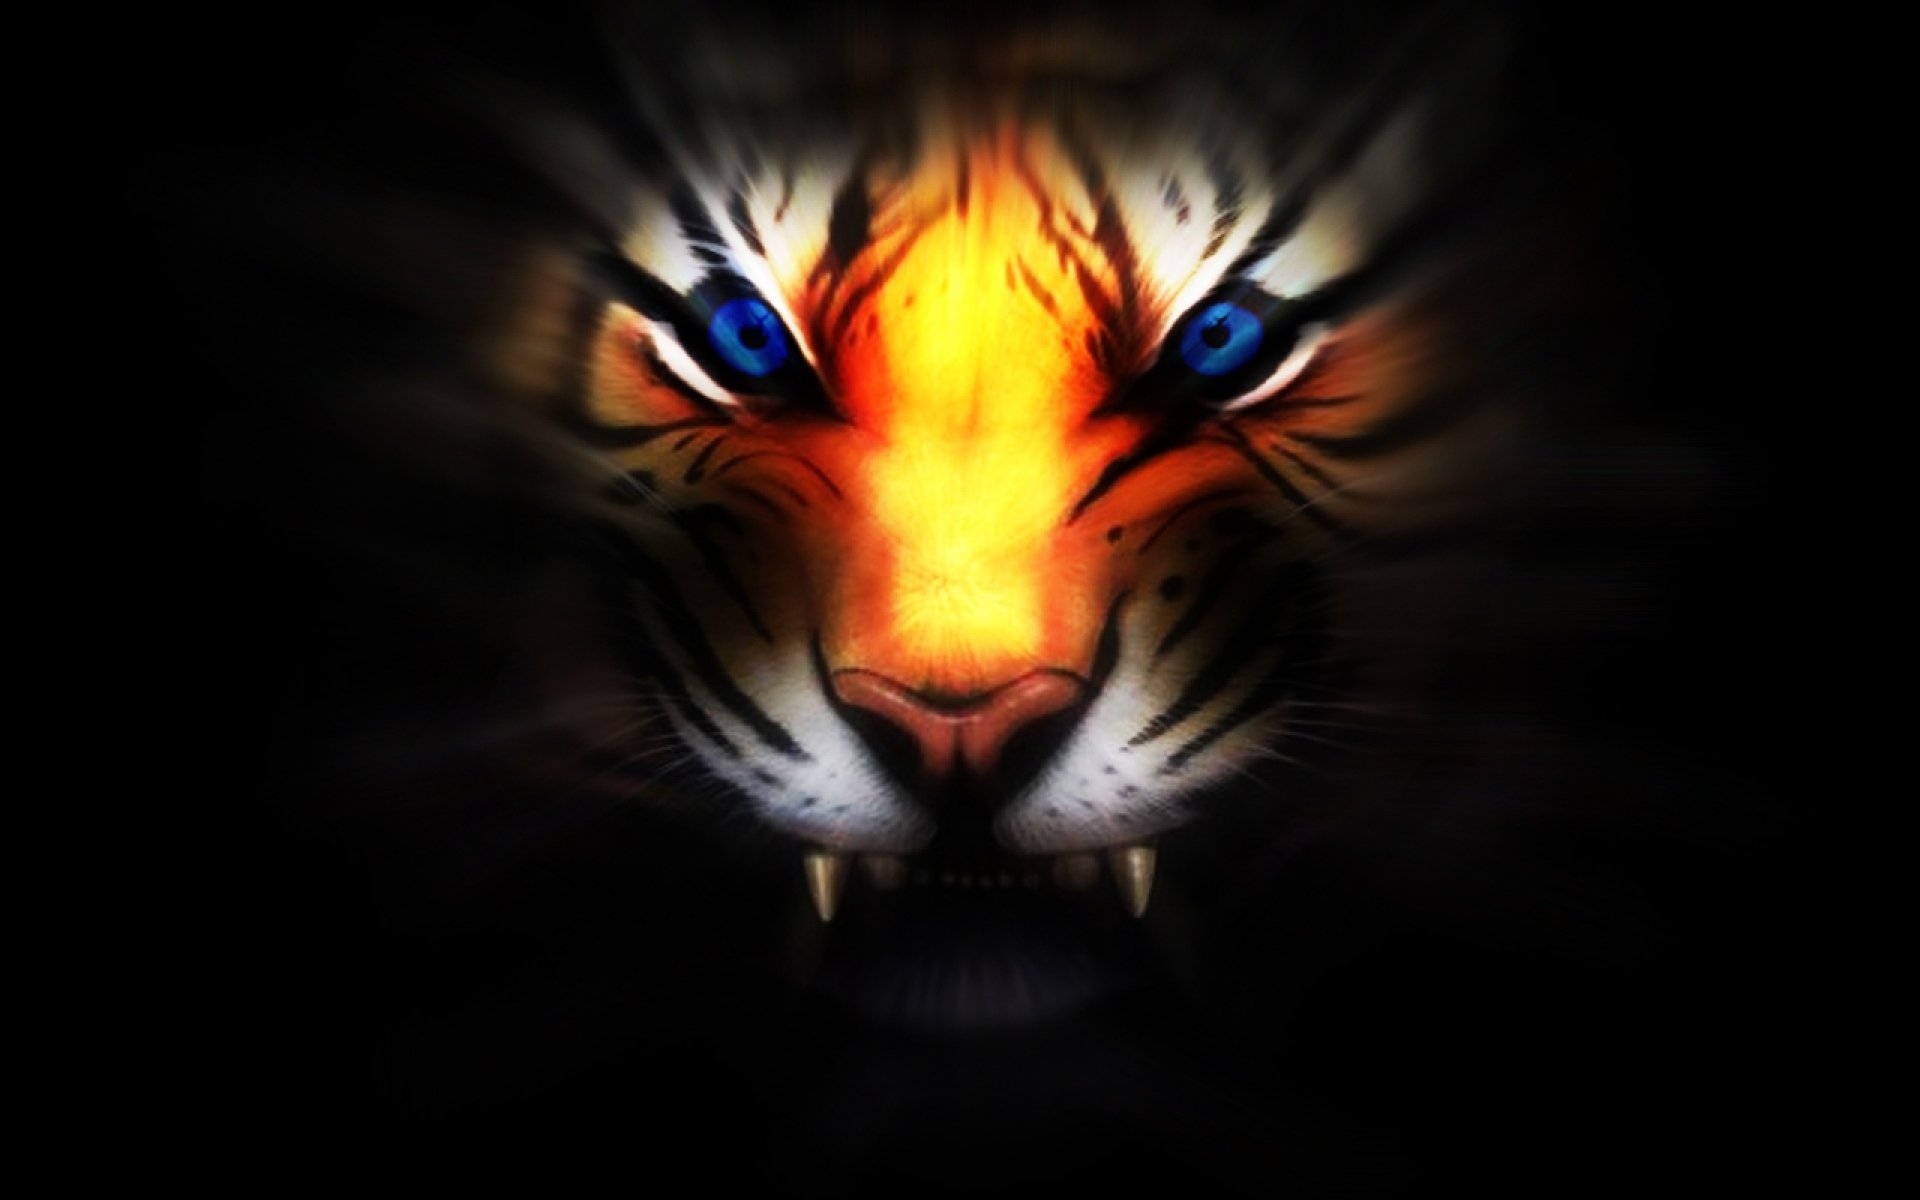 Wallpaper Hd Download For Android Mobile Tiger